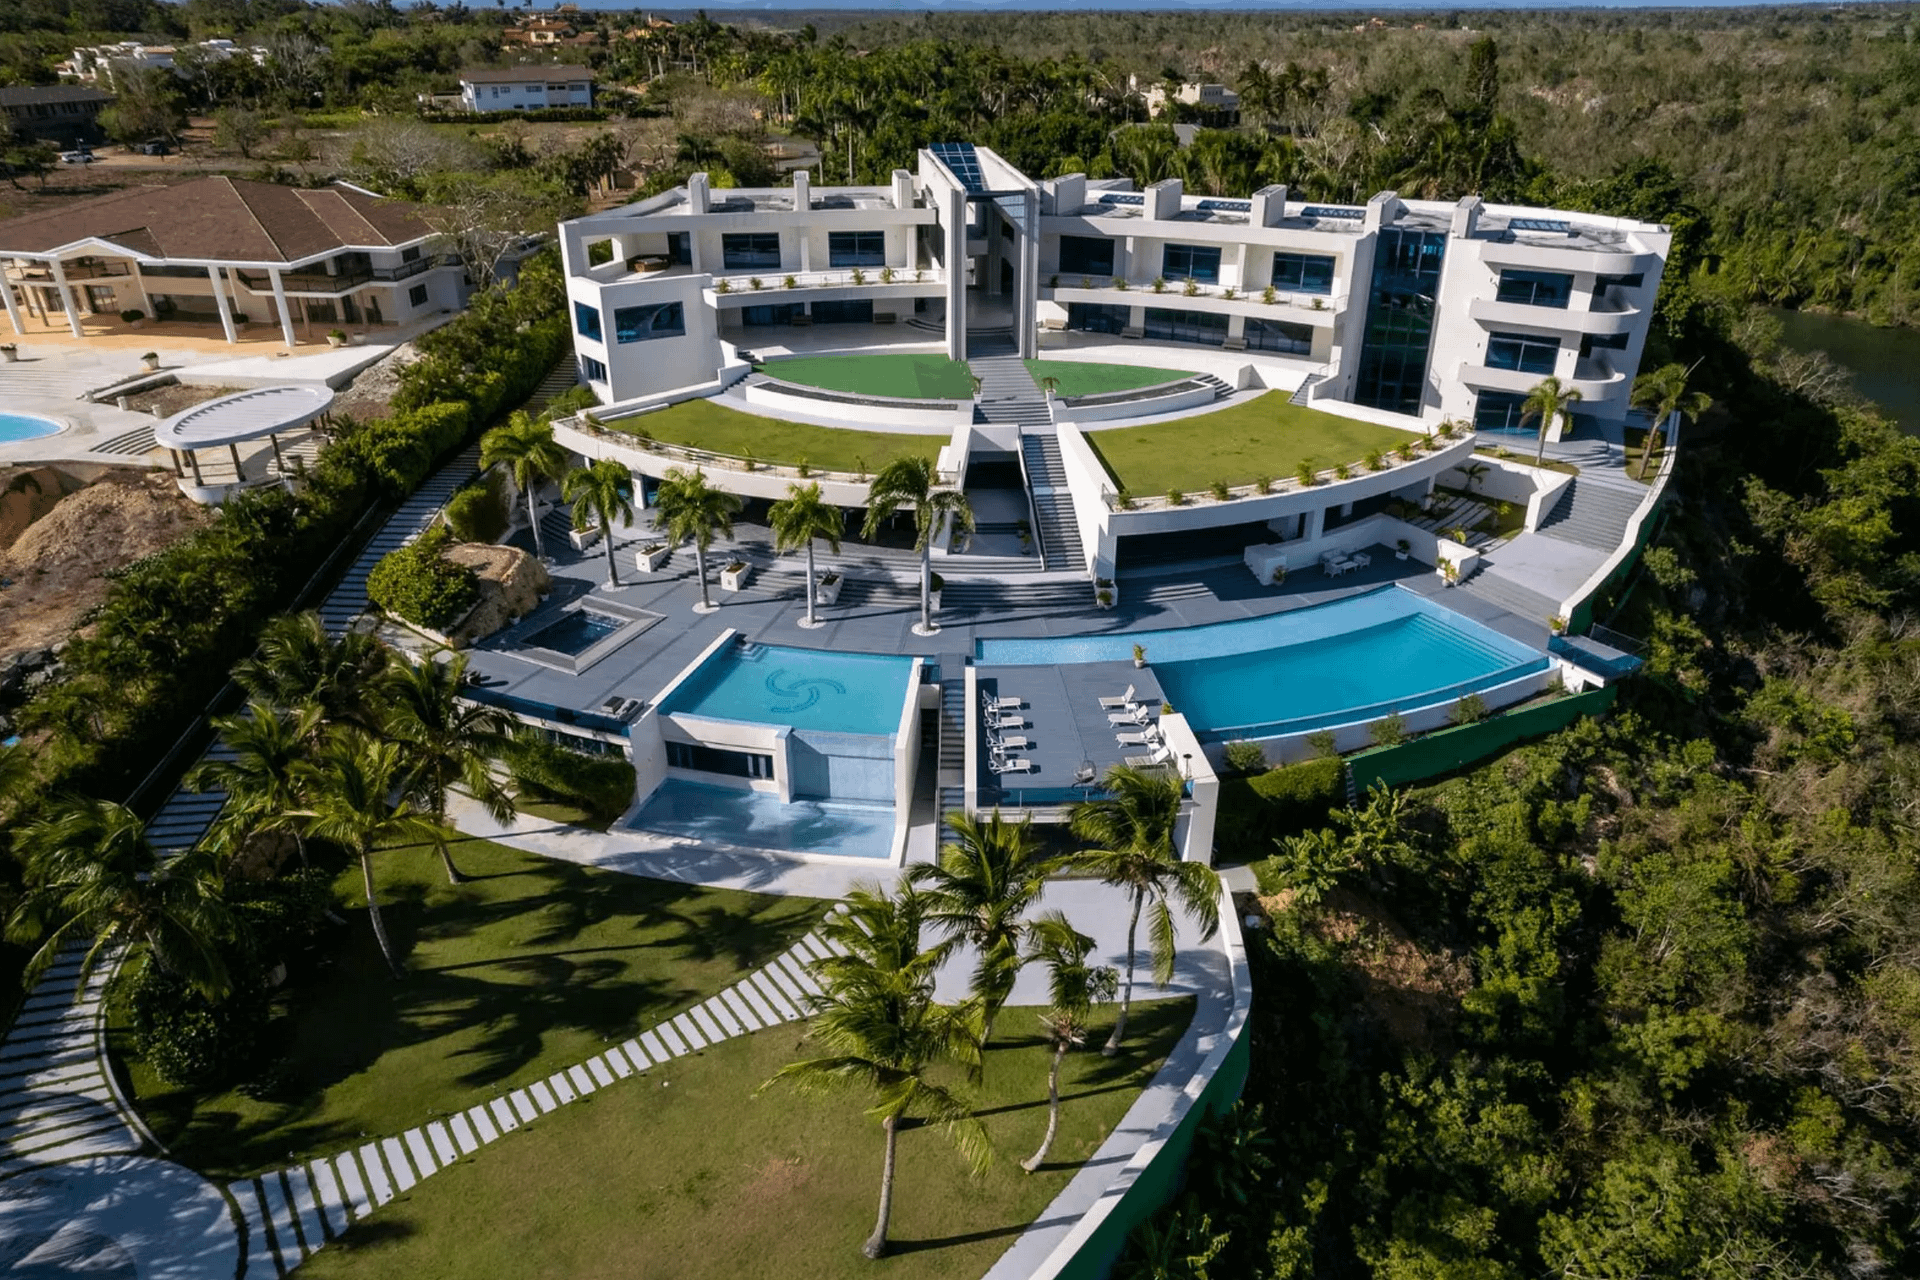 64,000 Square Foot Home In The Dominican Republic (PHOTOS)